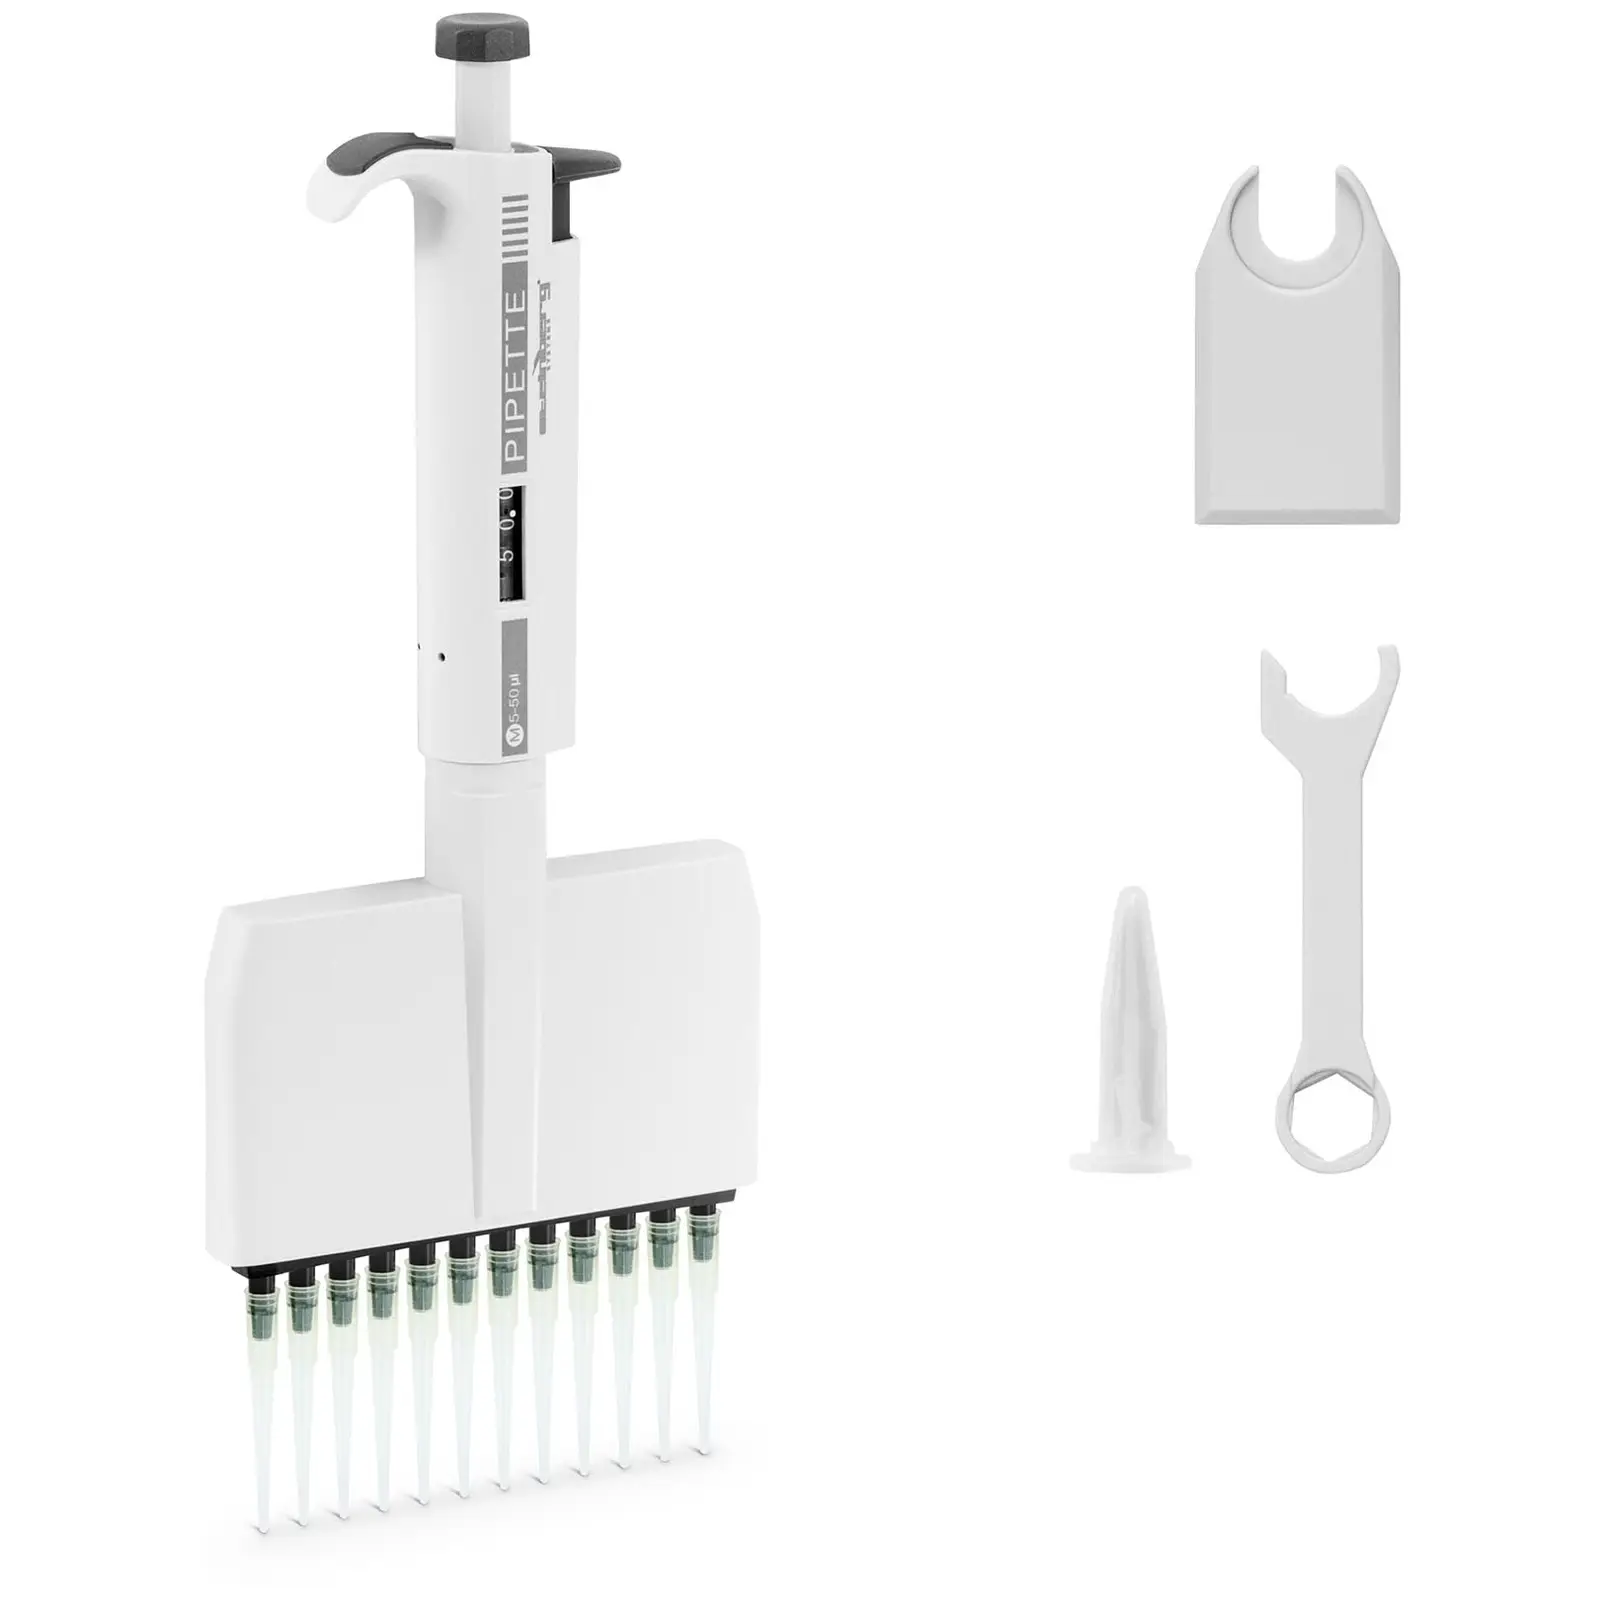 Multichannel pipette - for 12 tips - 0,005 - 0,05 ml